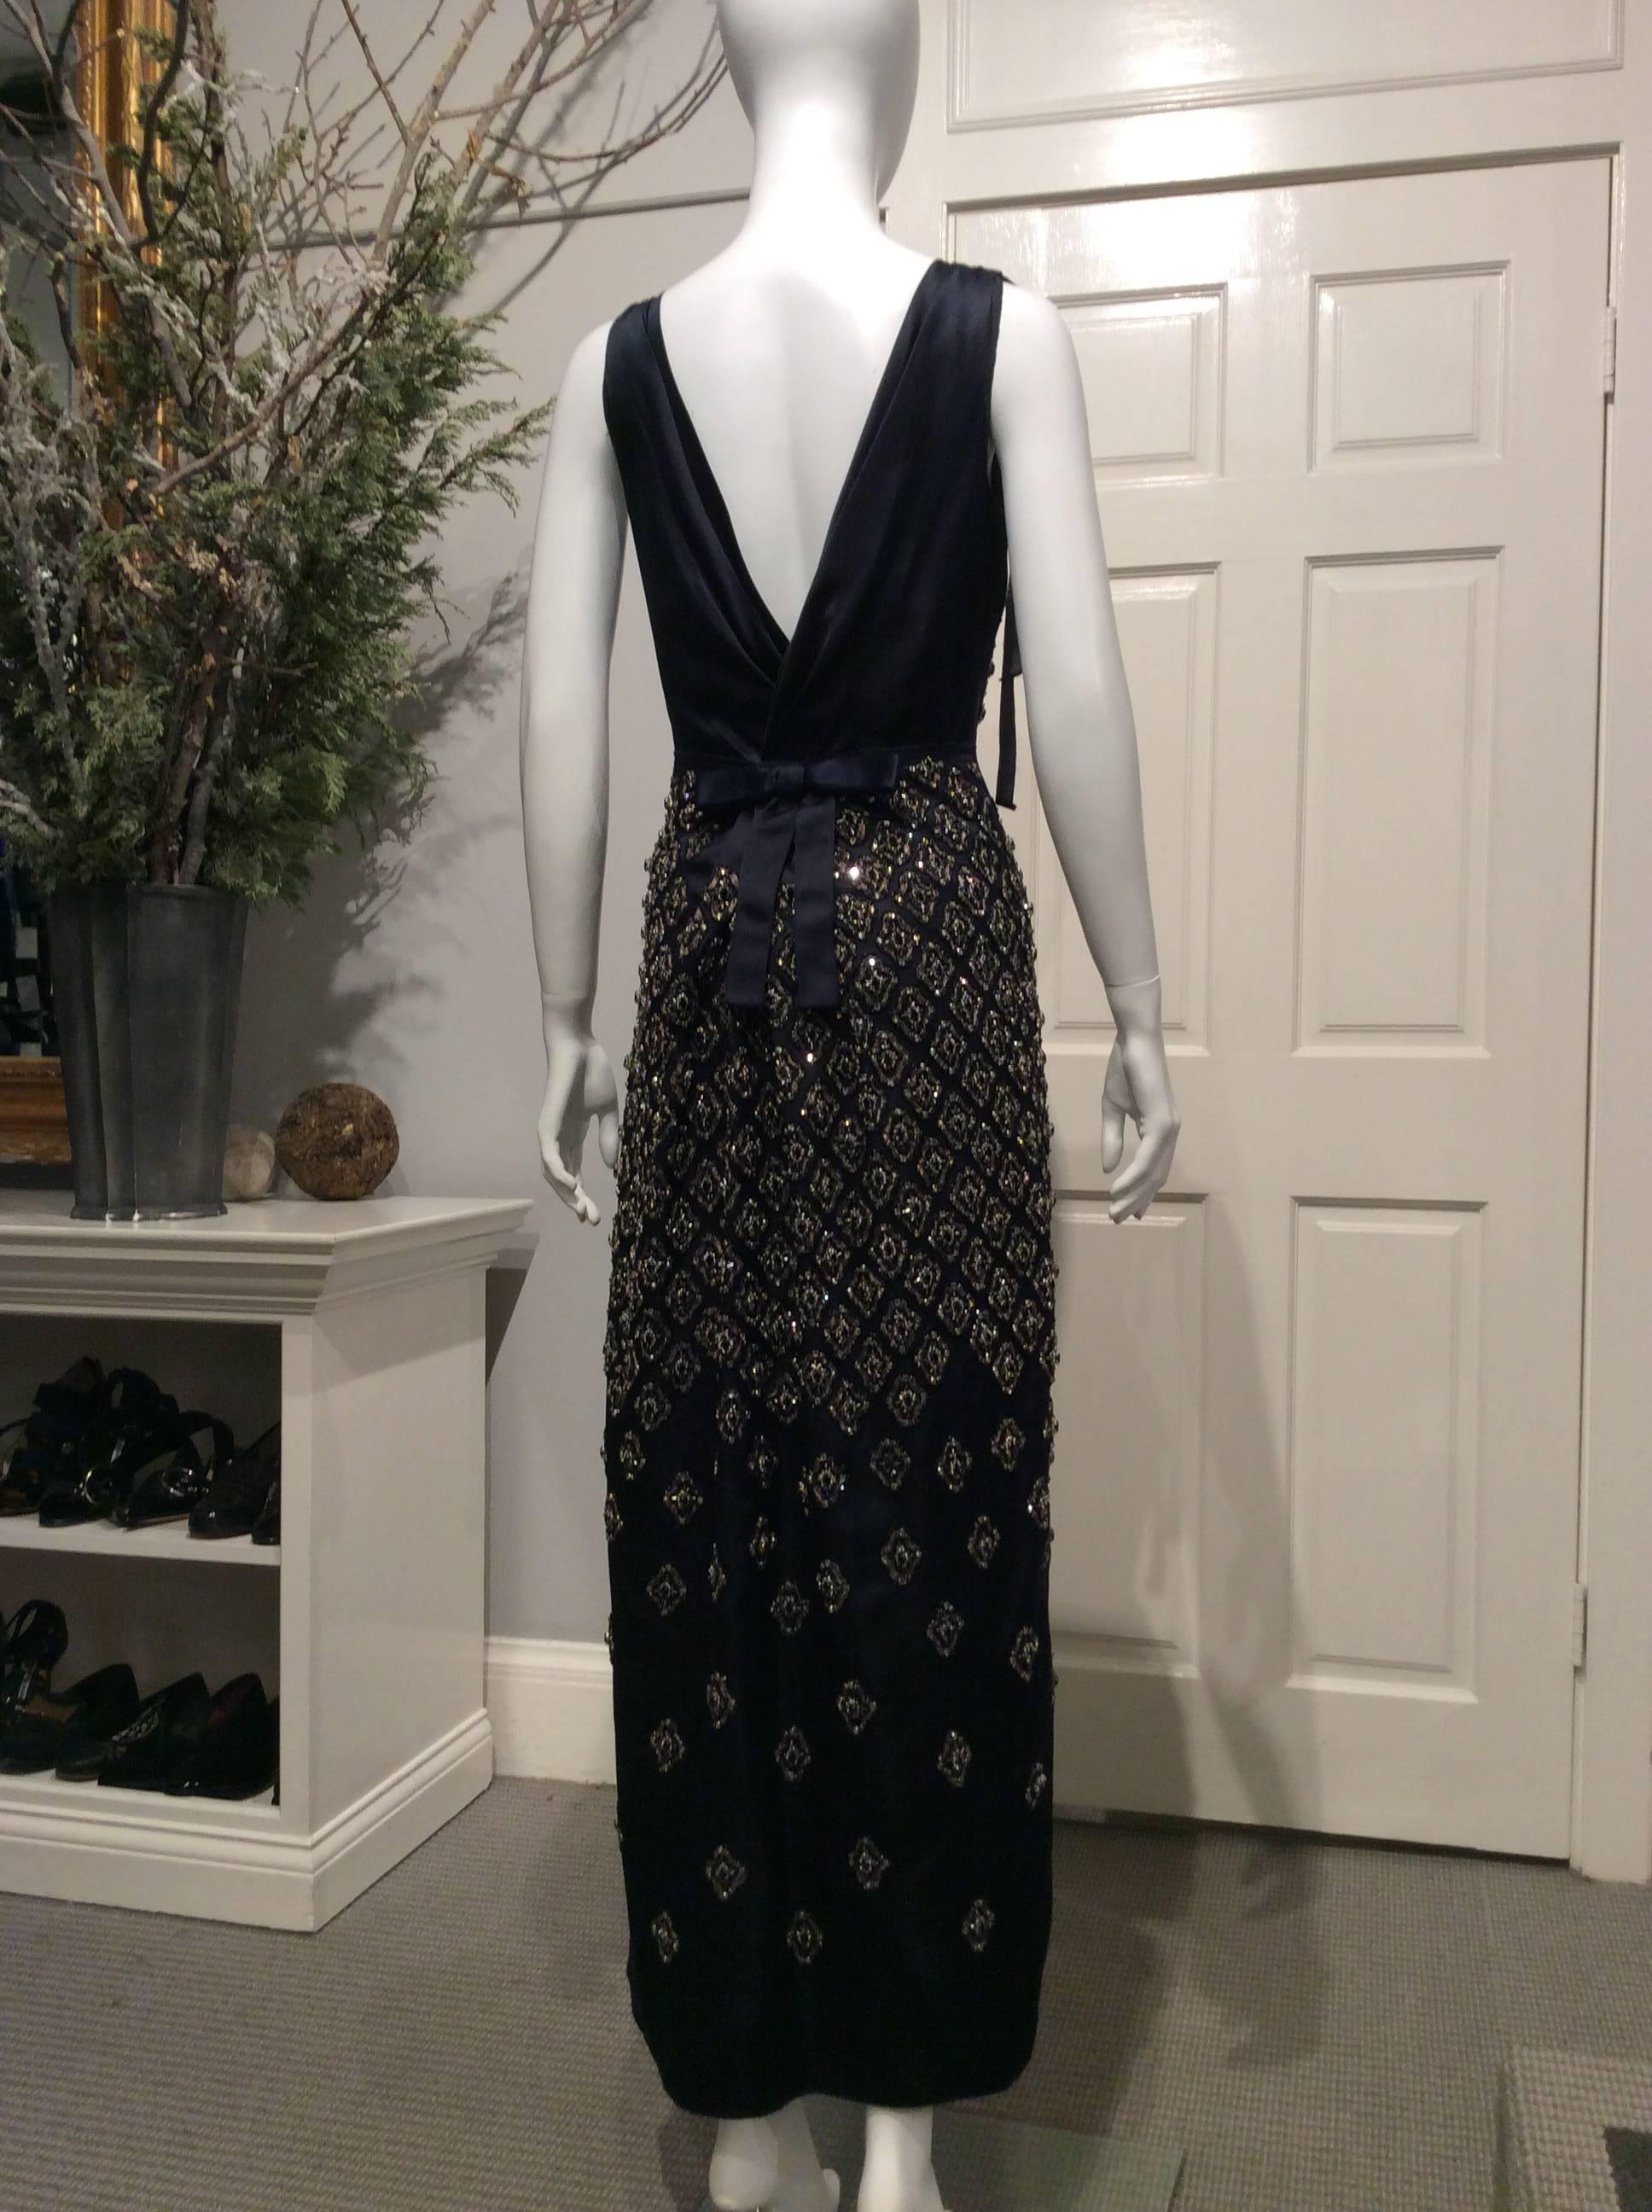 Stunning midnight blue satin gown covered in jewel embroidery in white and black rhinestones, silver glass beads and metallic copper thread. It has a waist deep v-neck back highlighted in the back with a flat bow. All seams are unfinished. It has a